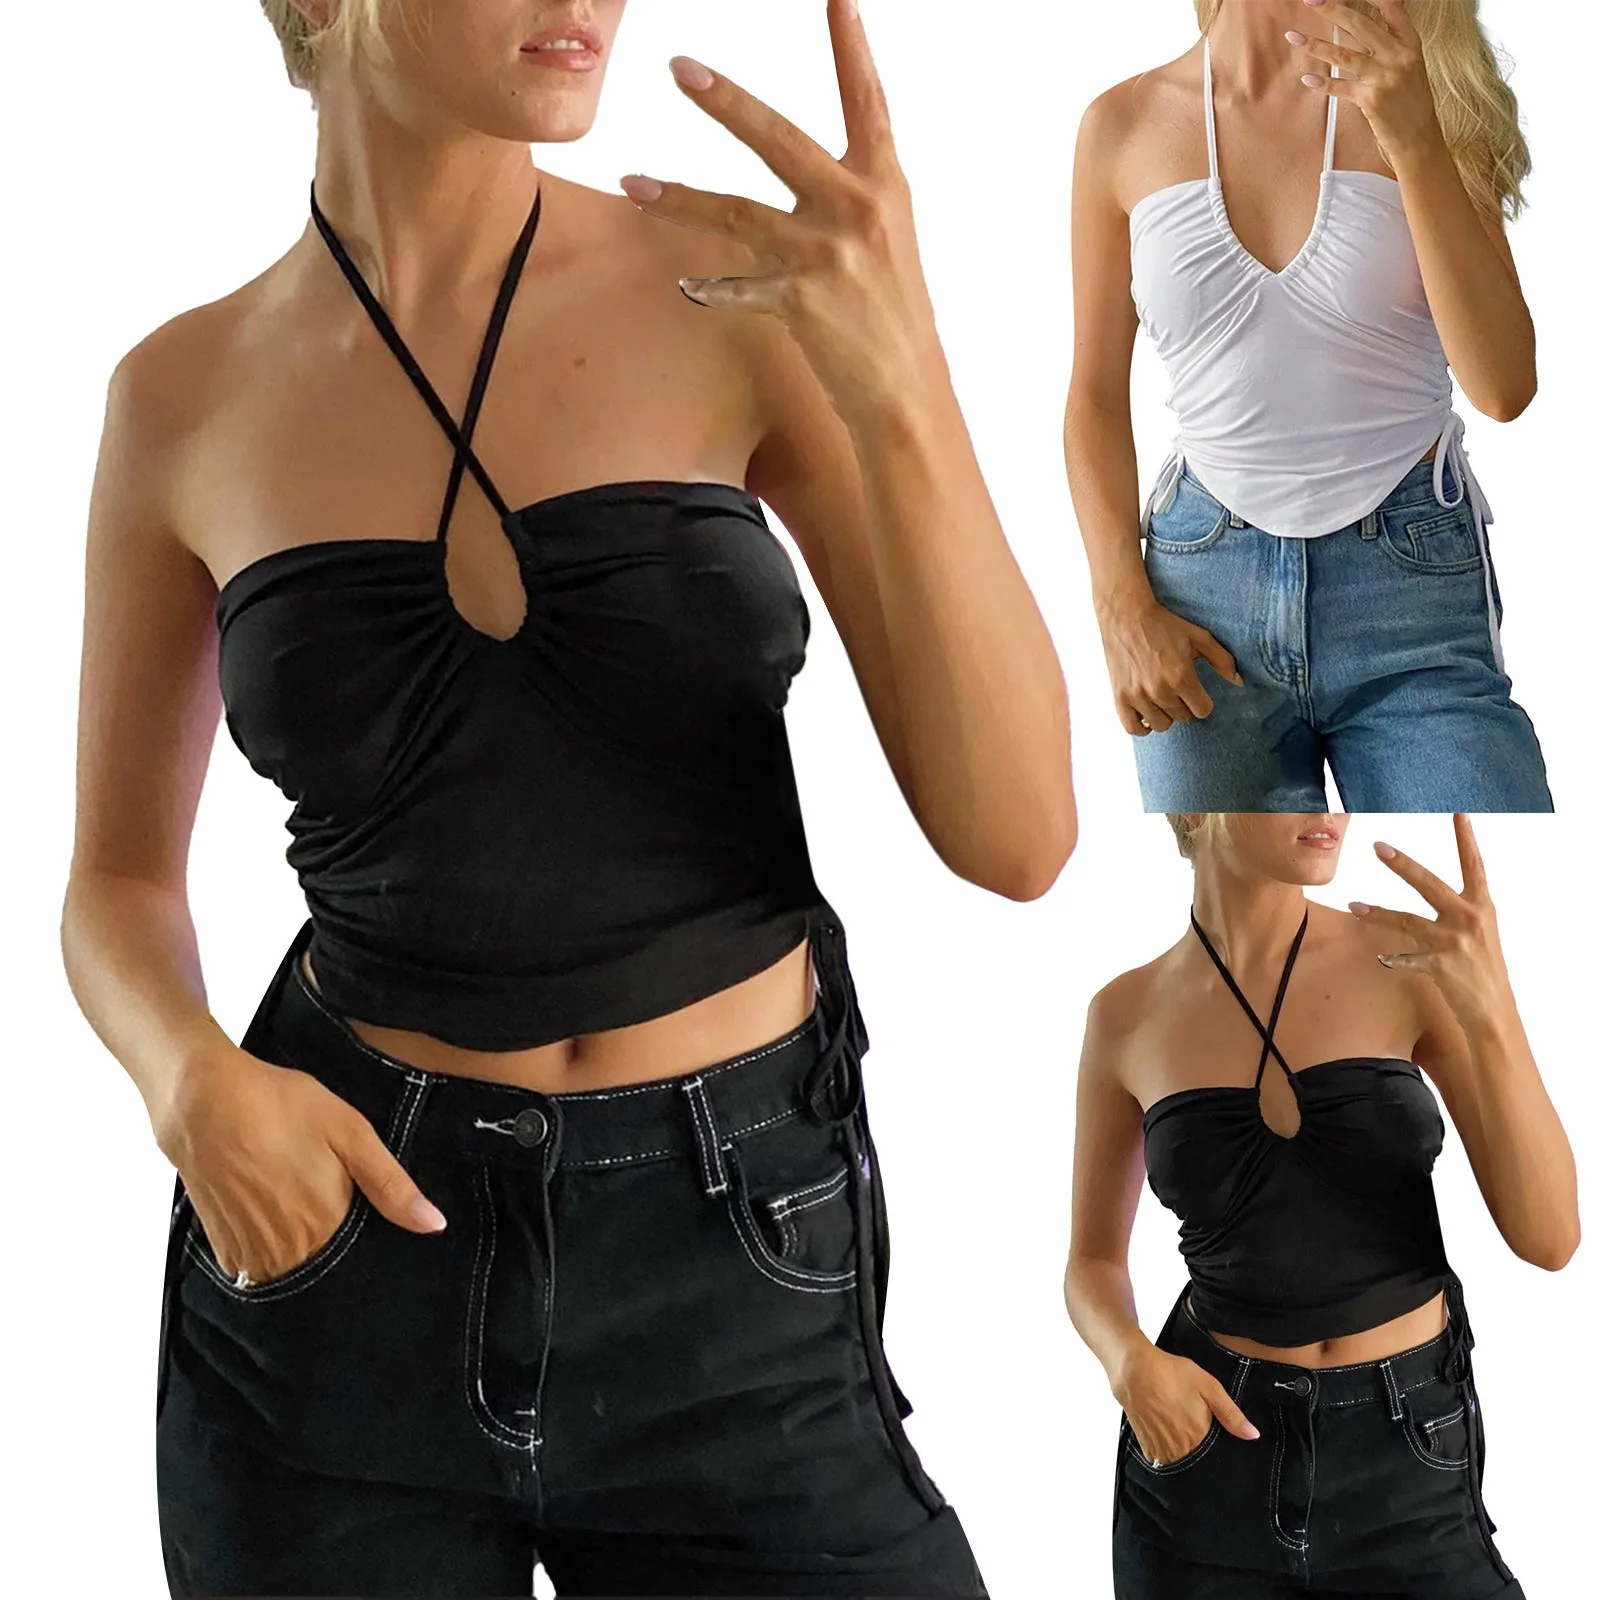 

Sports Basics Ladies Crop Tops Women's Halter Sleeveless Sexy Unique Slim Fit Tank Top Athletic Women Camis Blouse Strapless Tee